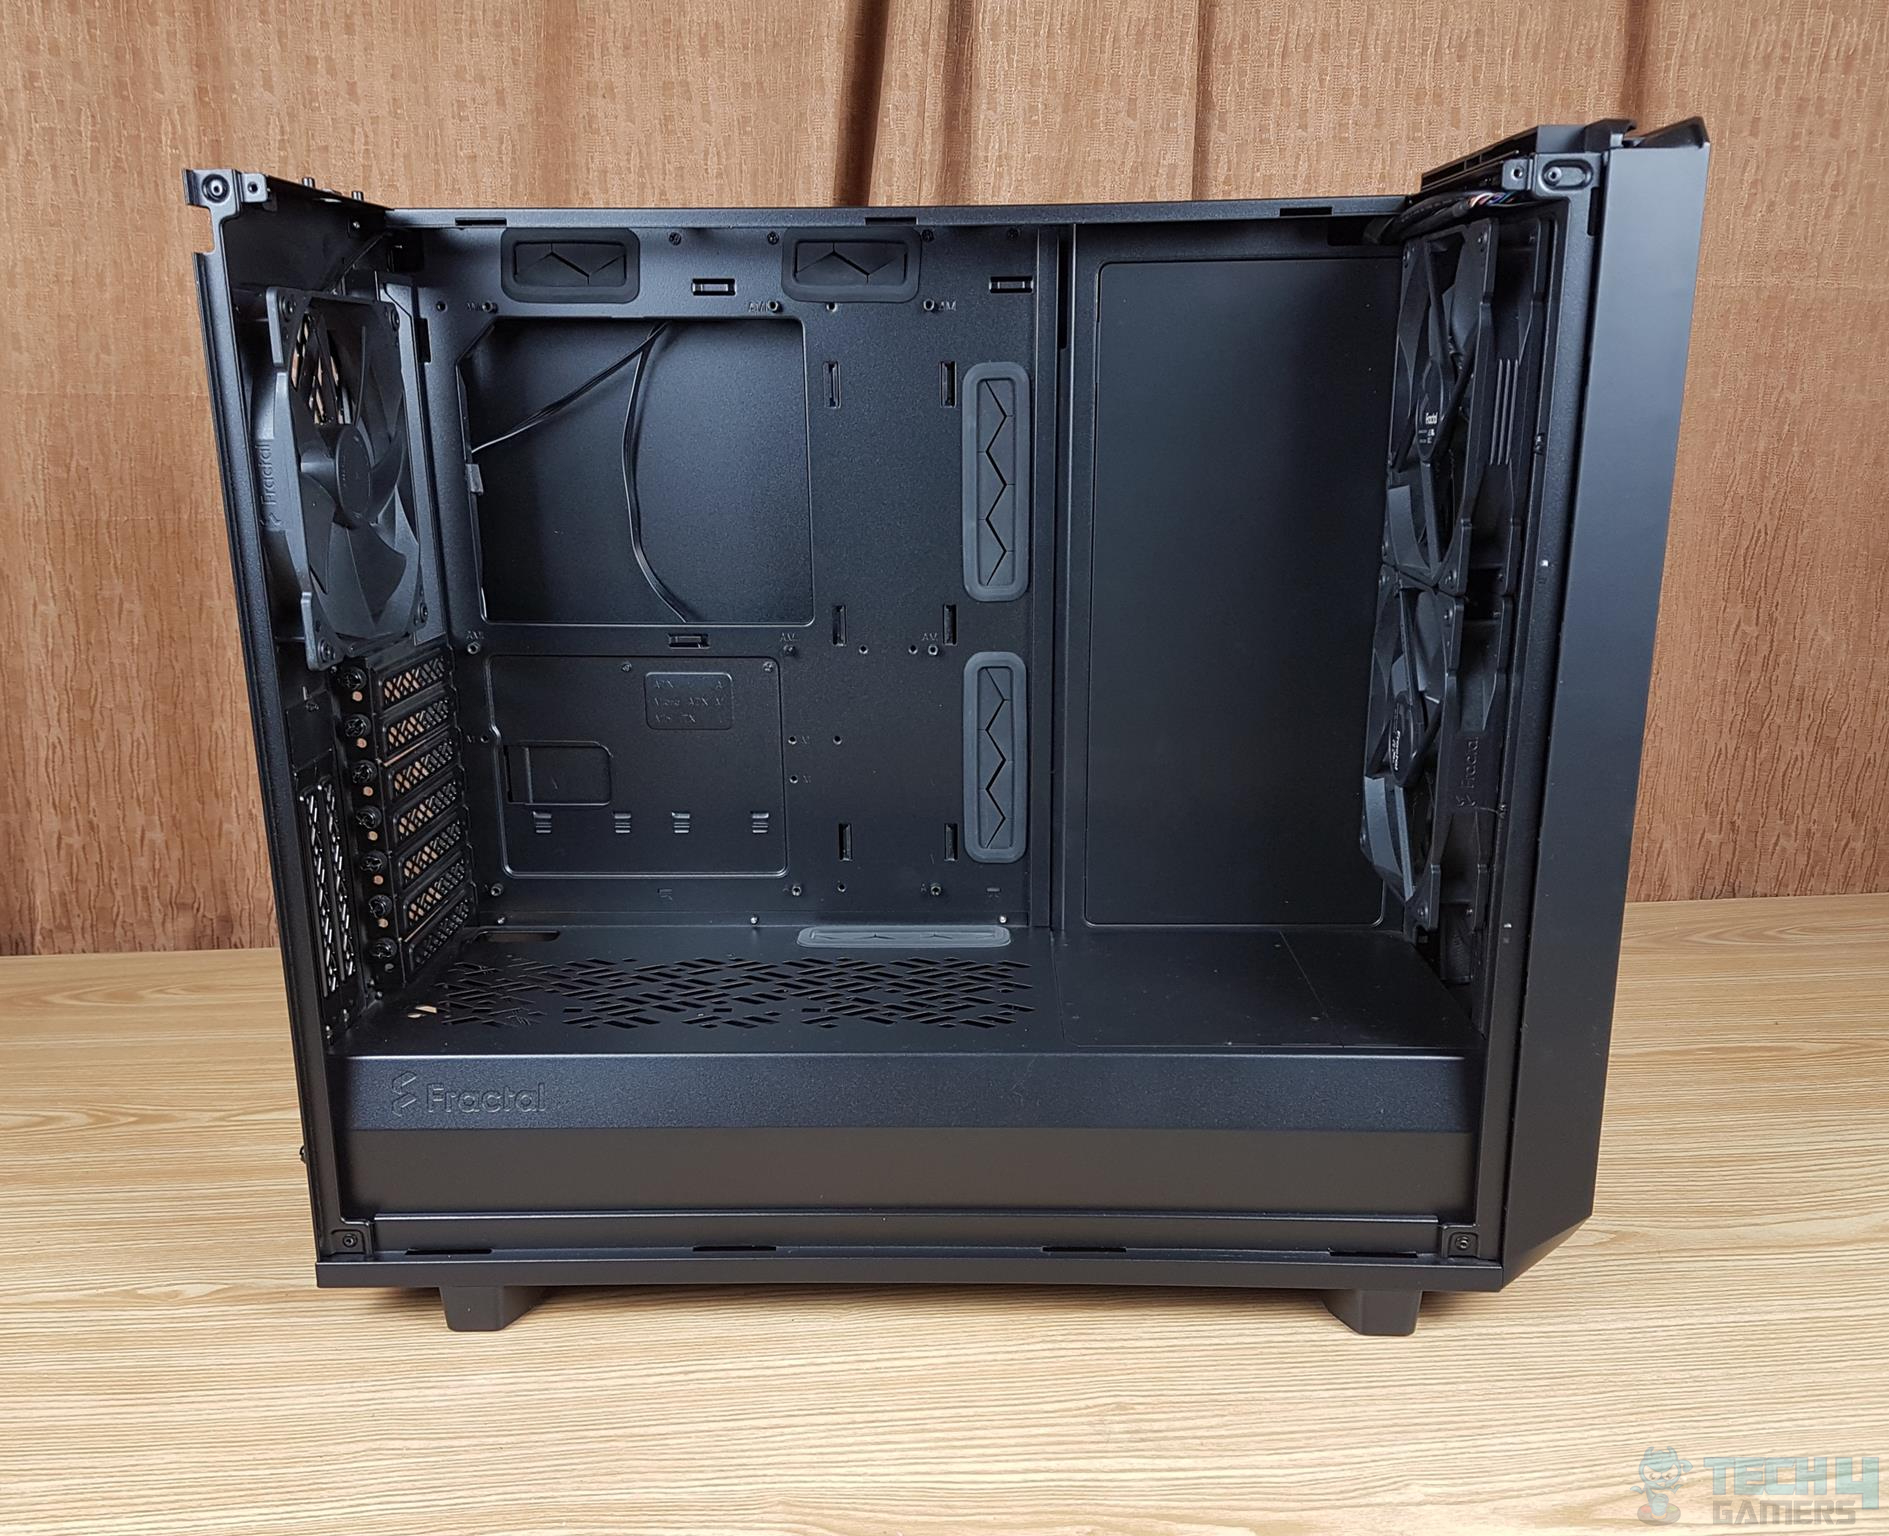 Fractal Design Meshify 2 — Side view of the case with the fan bracket removed